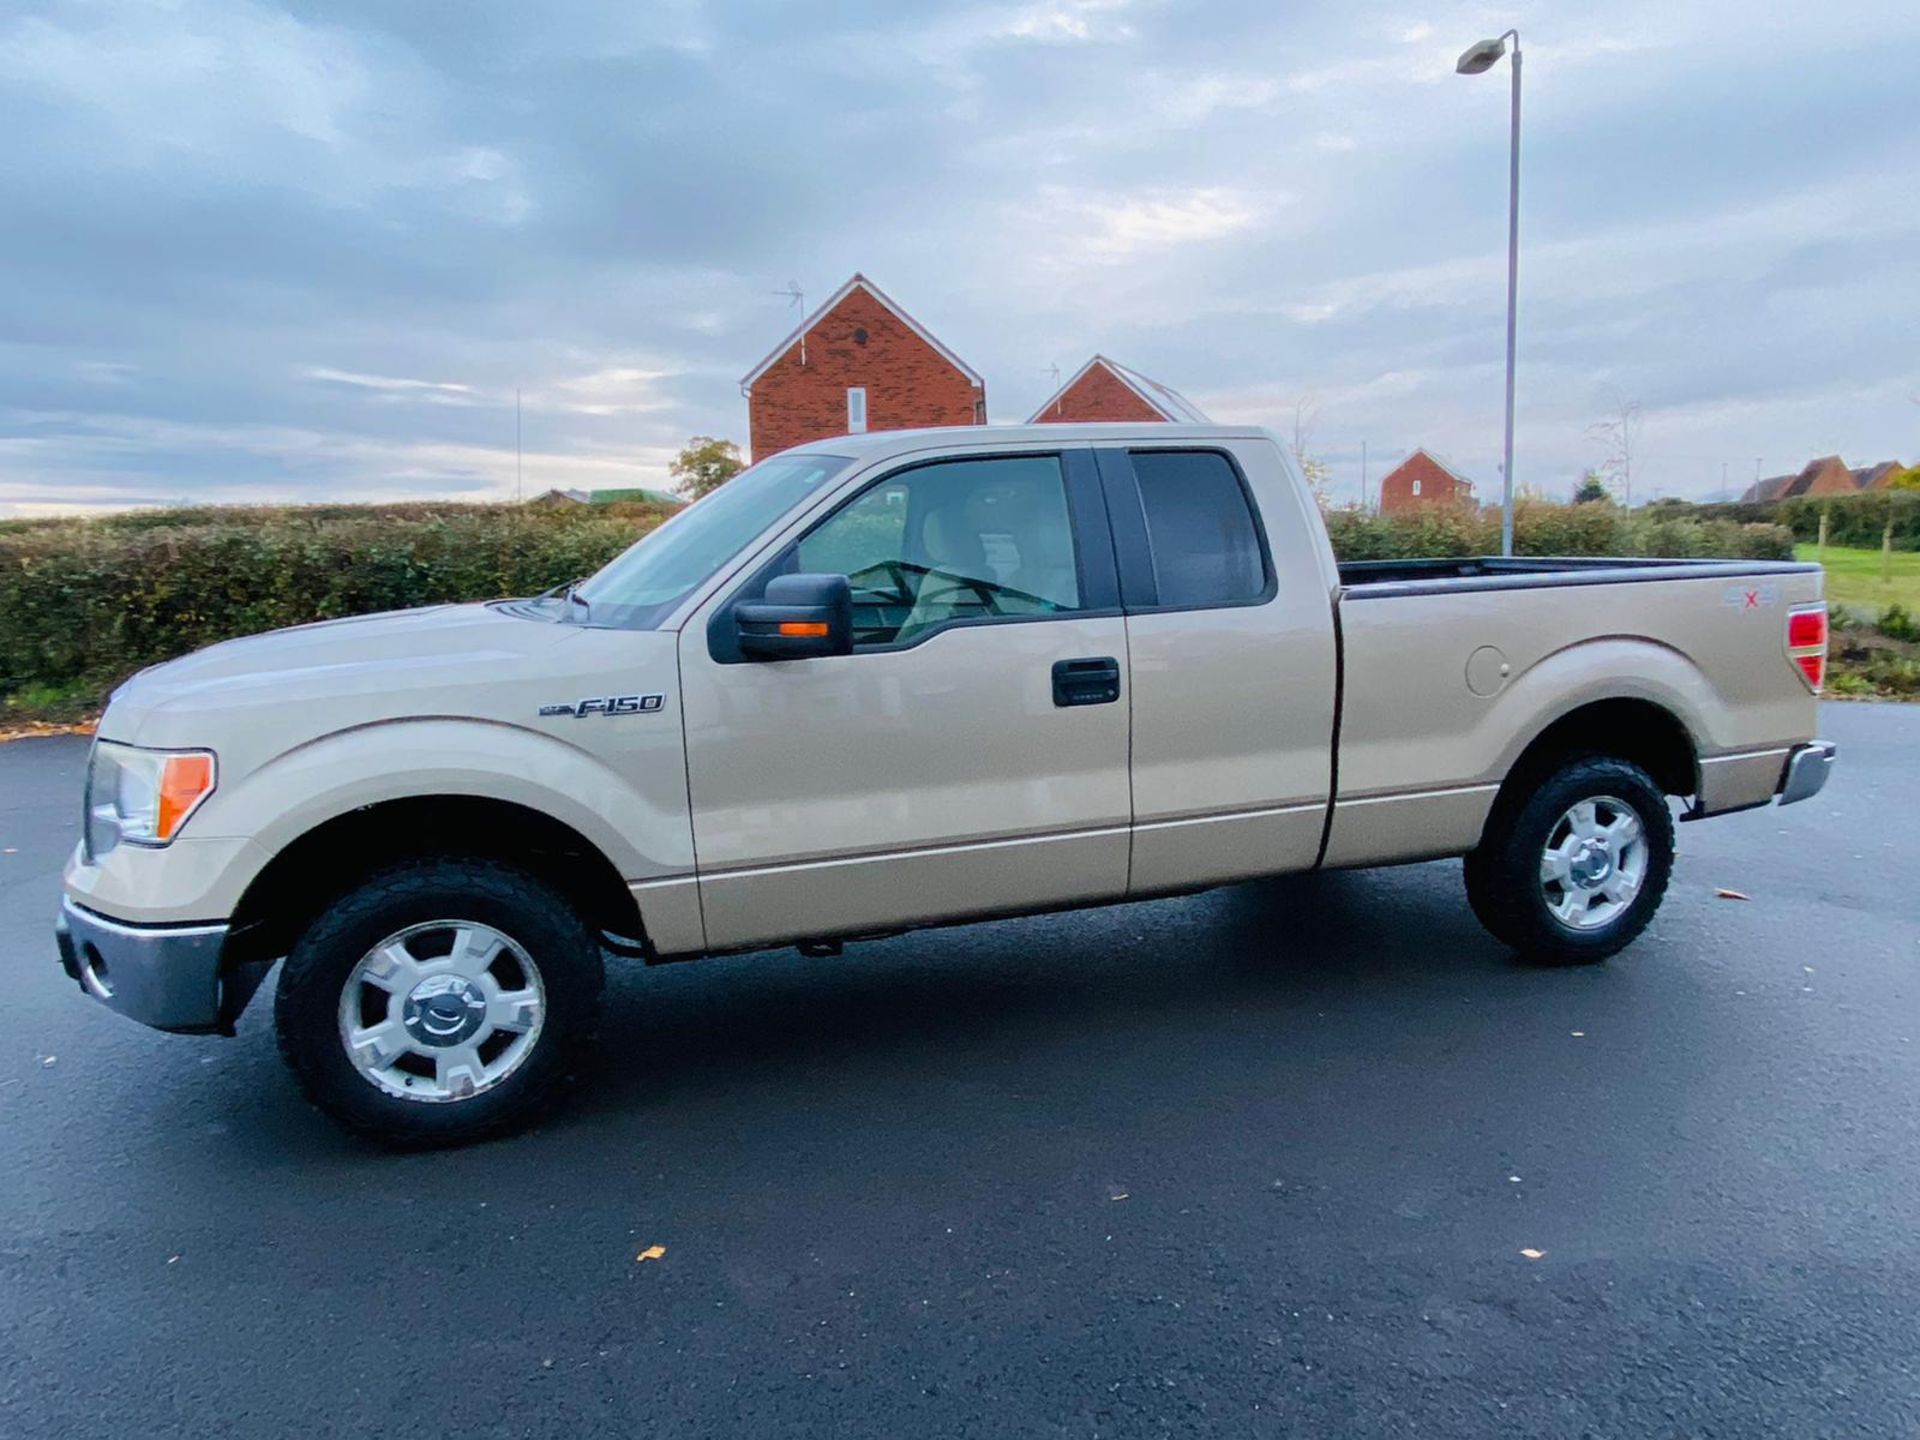 (RESERVE MET) Ford F-150 XLT 4.6L V8 Supercab - 2010 Year - 6 Seats - Fresh Imports - Image 2 of 39